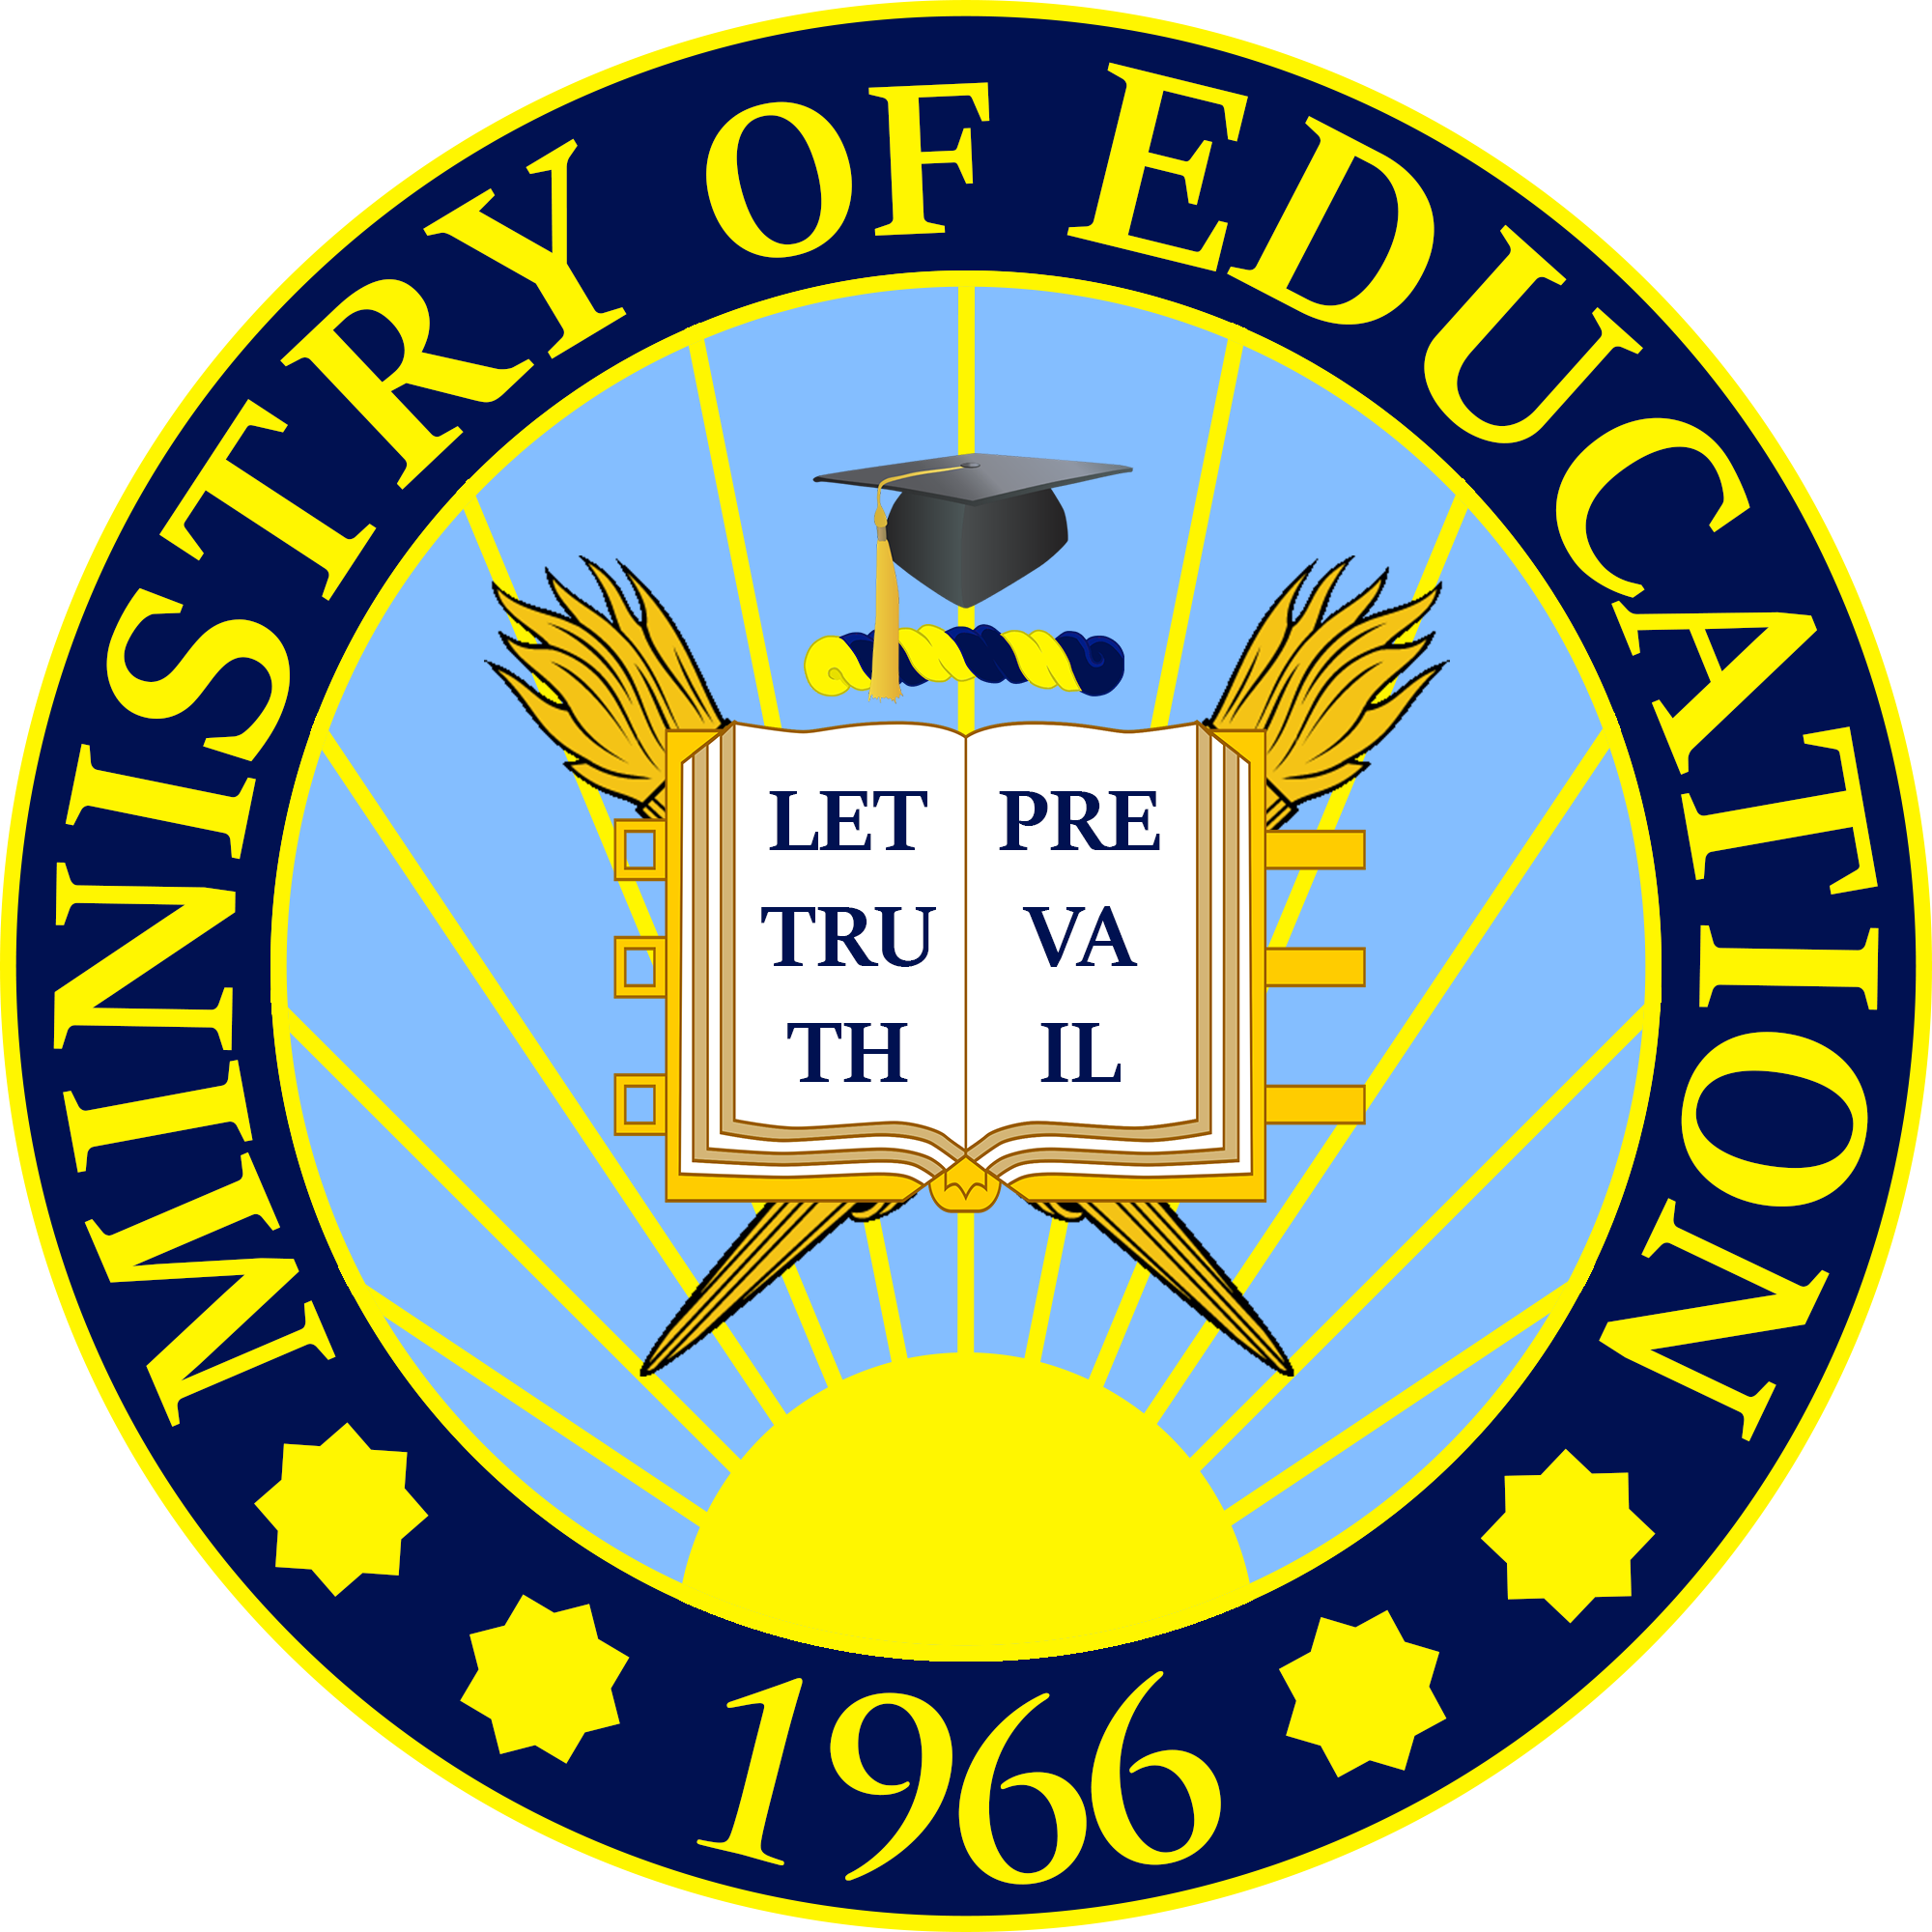 ministry of education